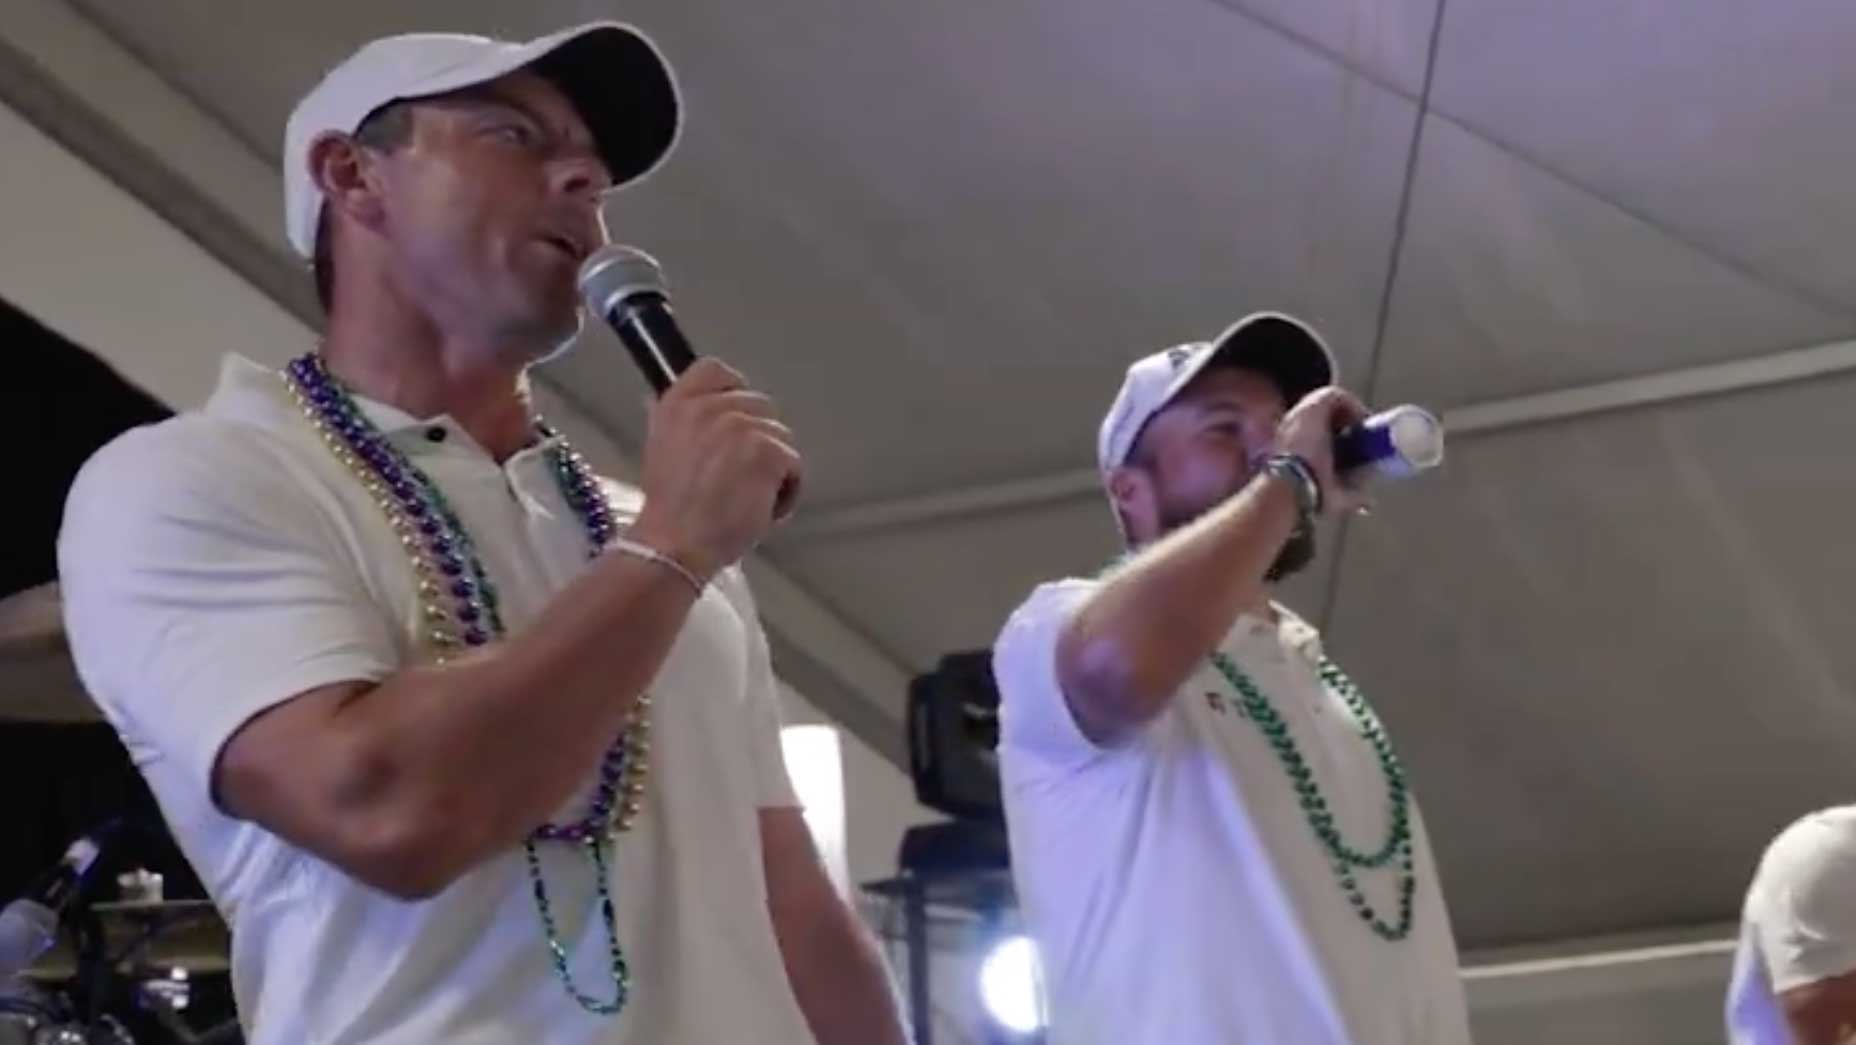 Rory McIlroy and Shane Lowry sing "Don't Stop Believing" after winning the Zurich Classic.